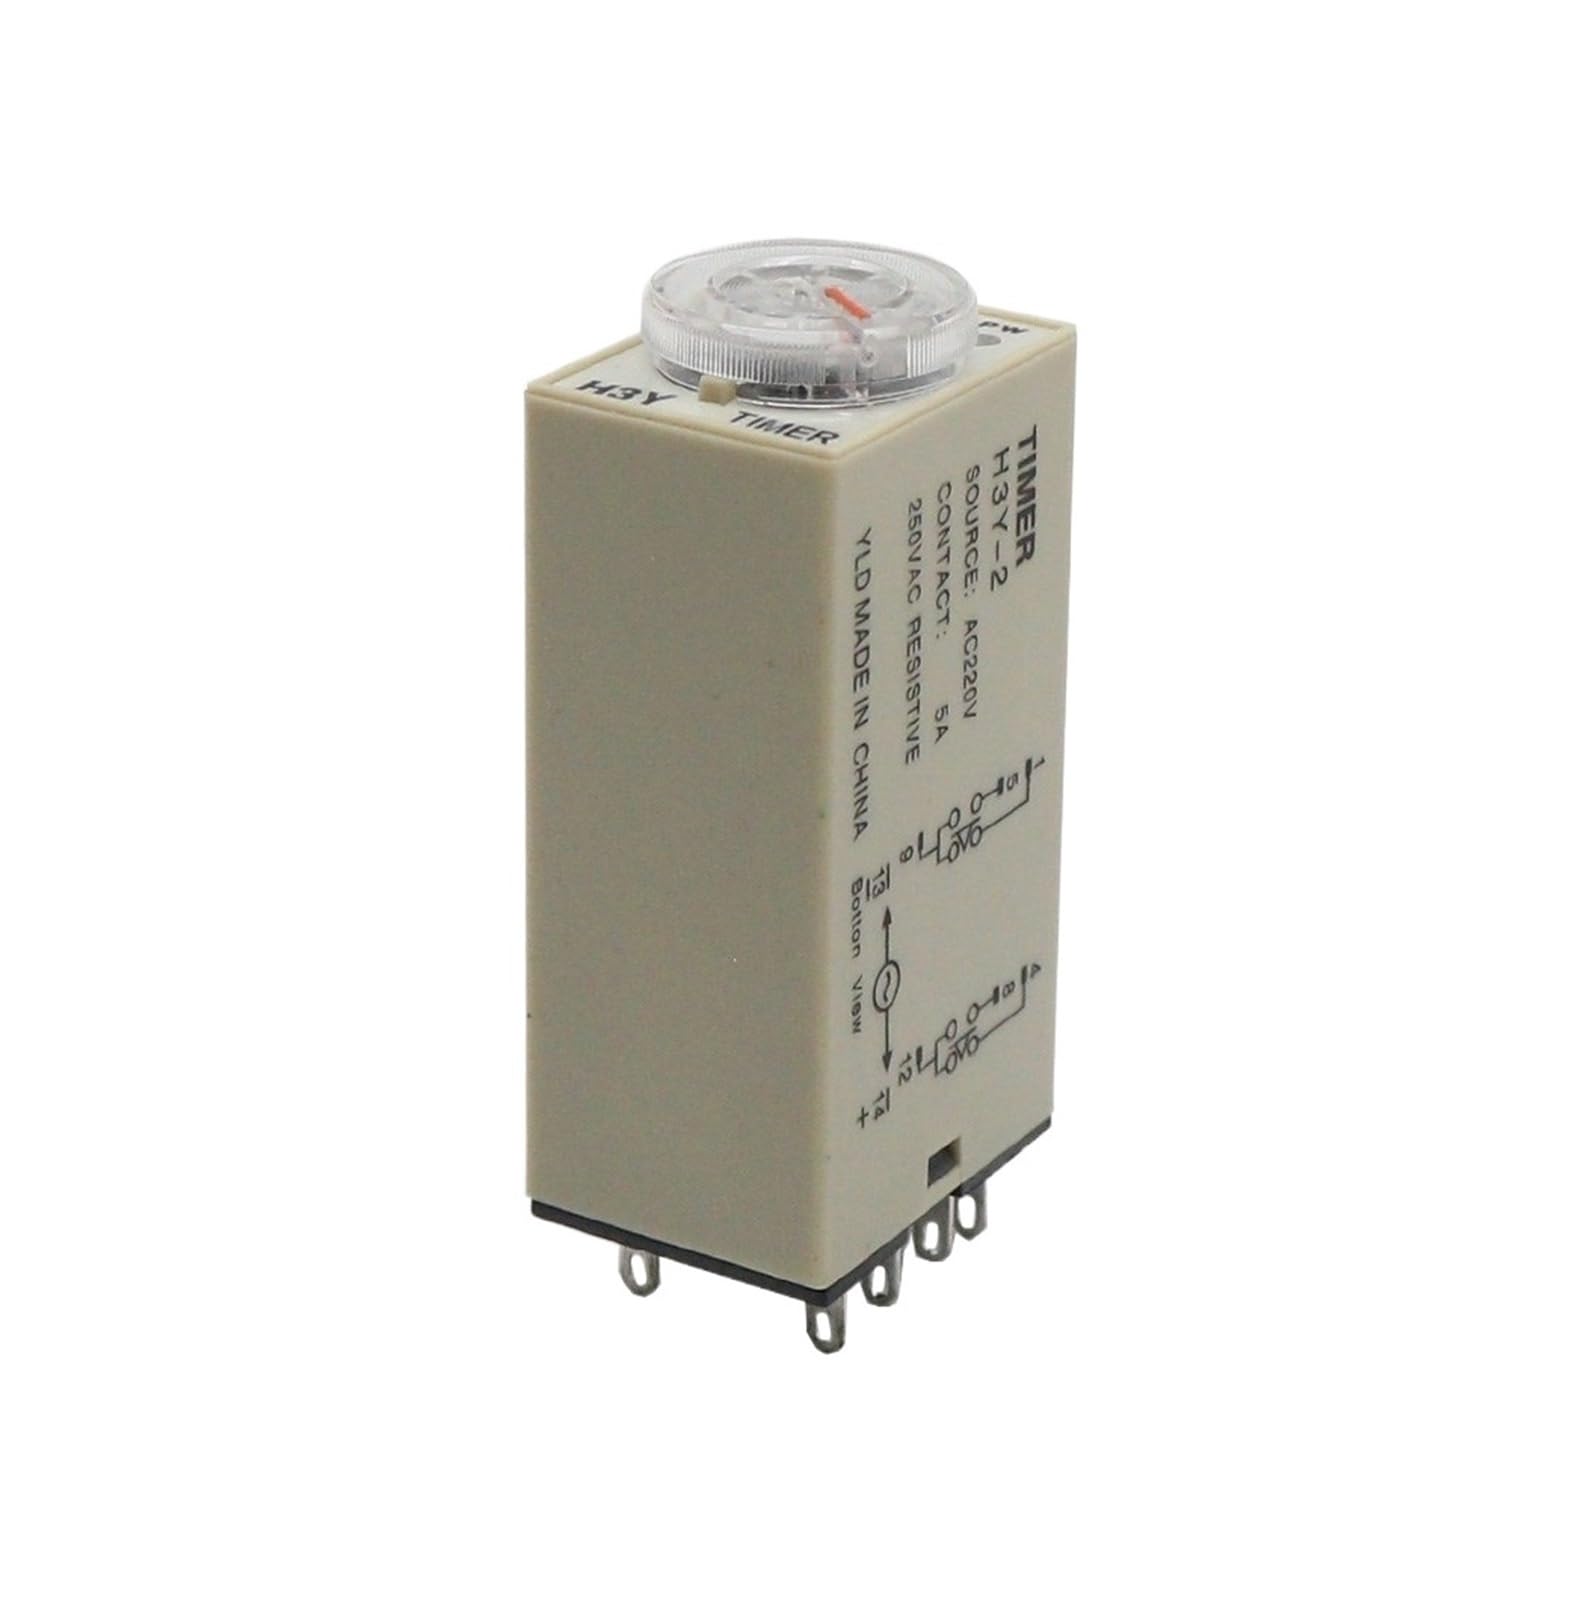 1pcs Power on Delay Time Relay H3Y-2 Small 8-pinDC12V24vAC220v Timer Switch 1S 3S 5S 30S 60S 5M 10M 30M 60M LABDIP(DC 24V,H3Y-2 30Minute) von LABDIP